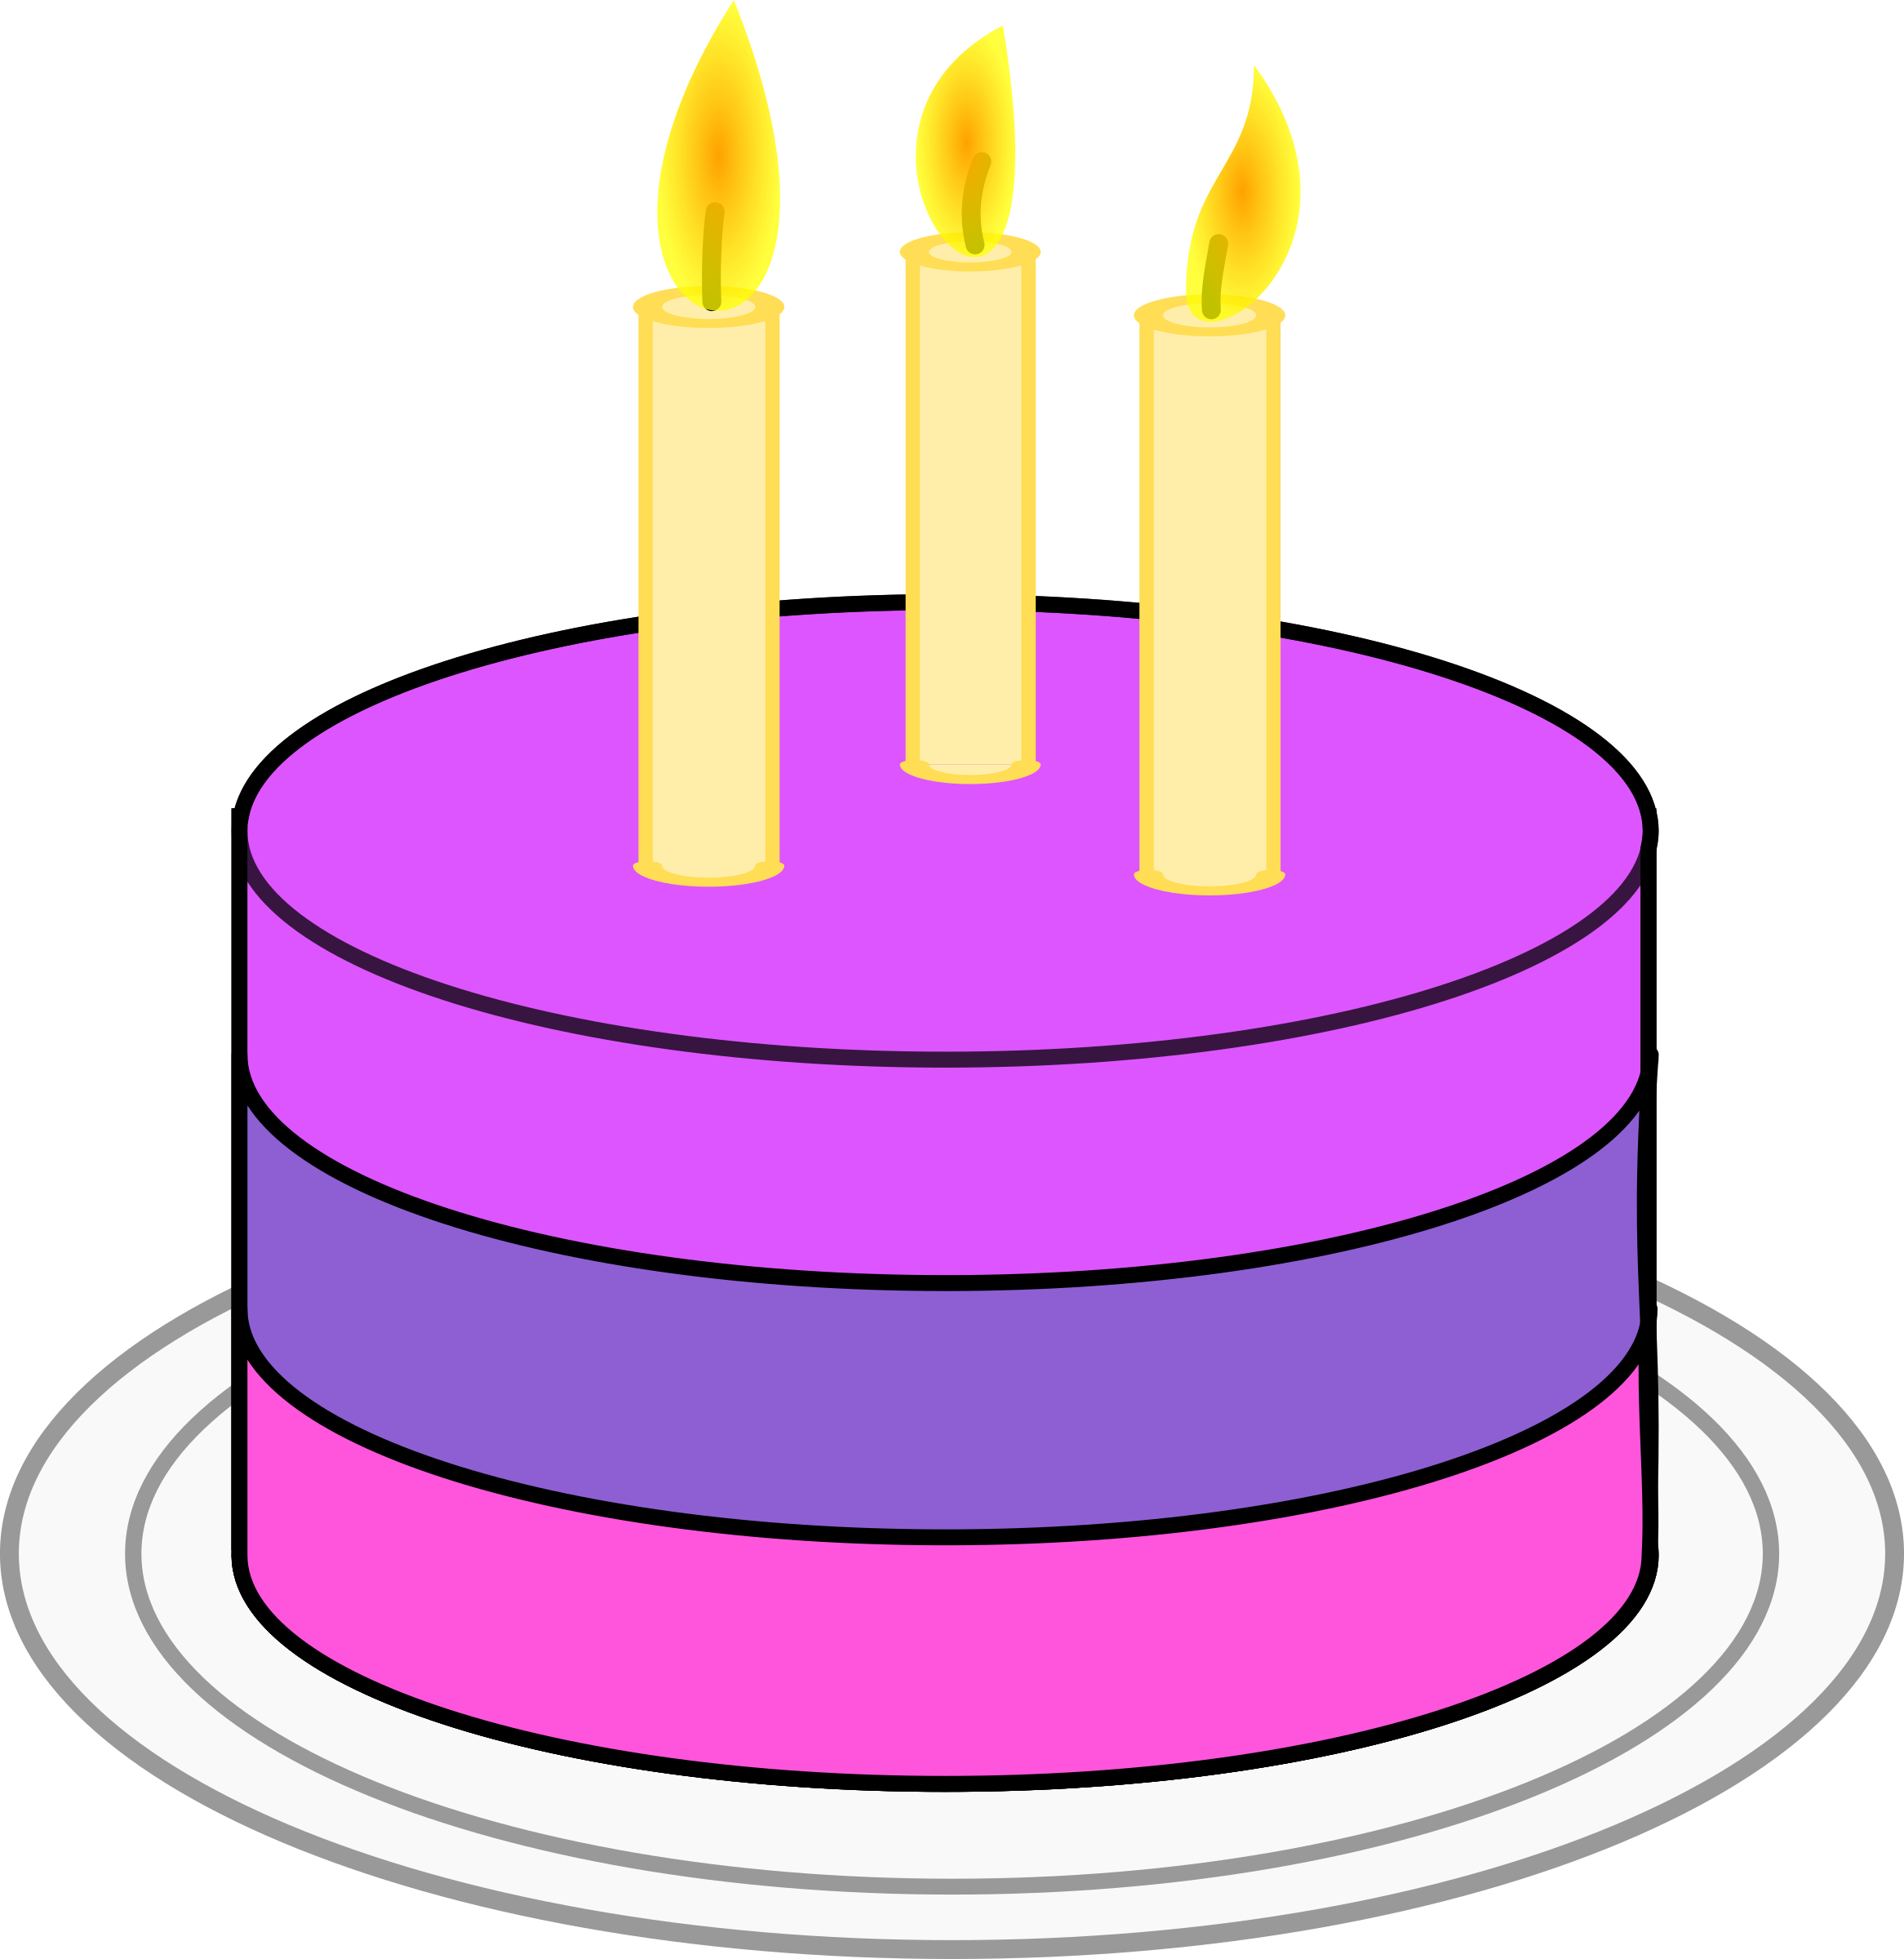 Cake clipart simple. Birthday big image png